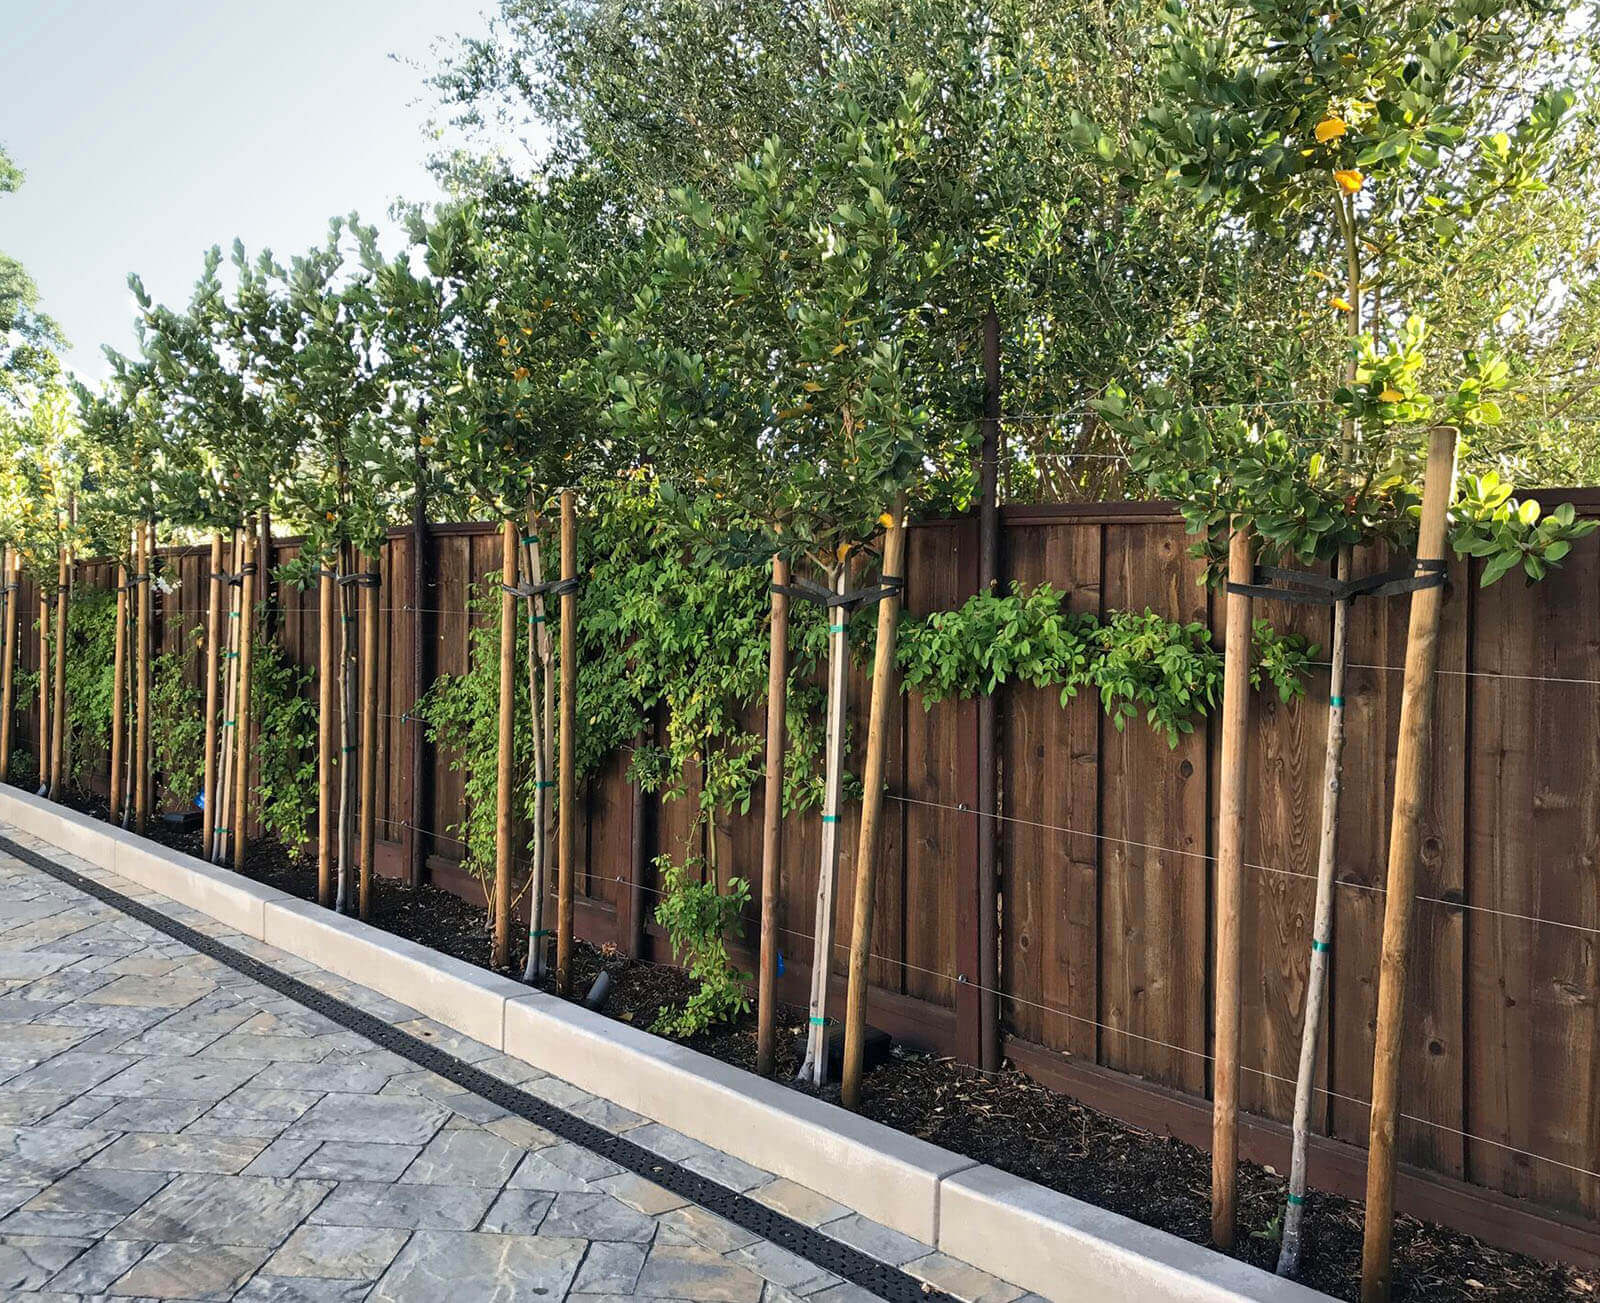 Wooden fence with 'floating hedge' of newly planted screening trees